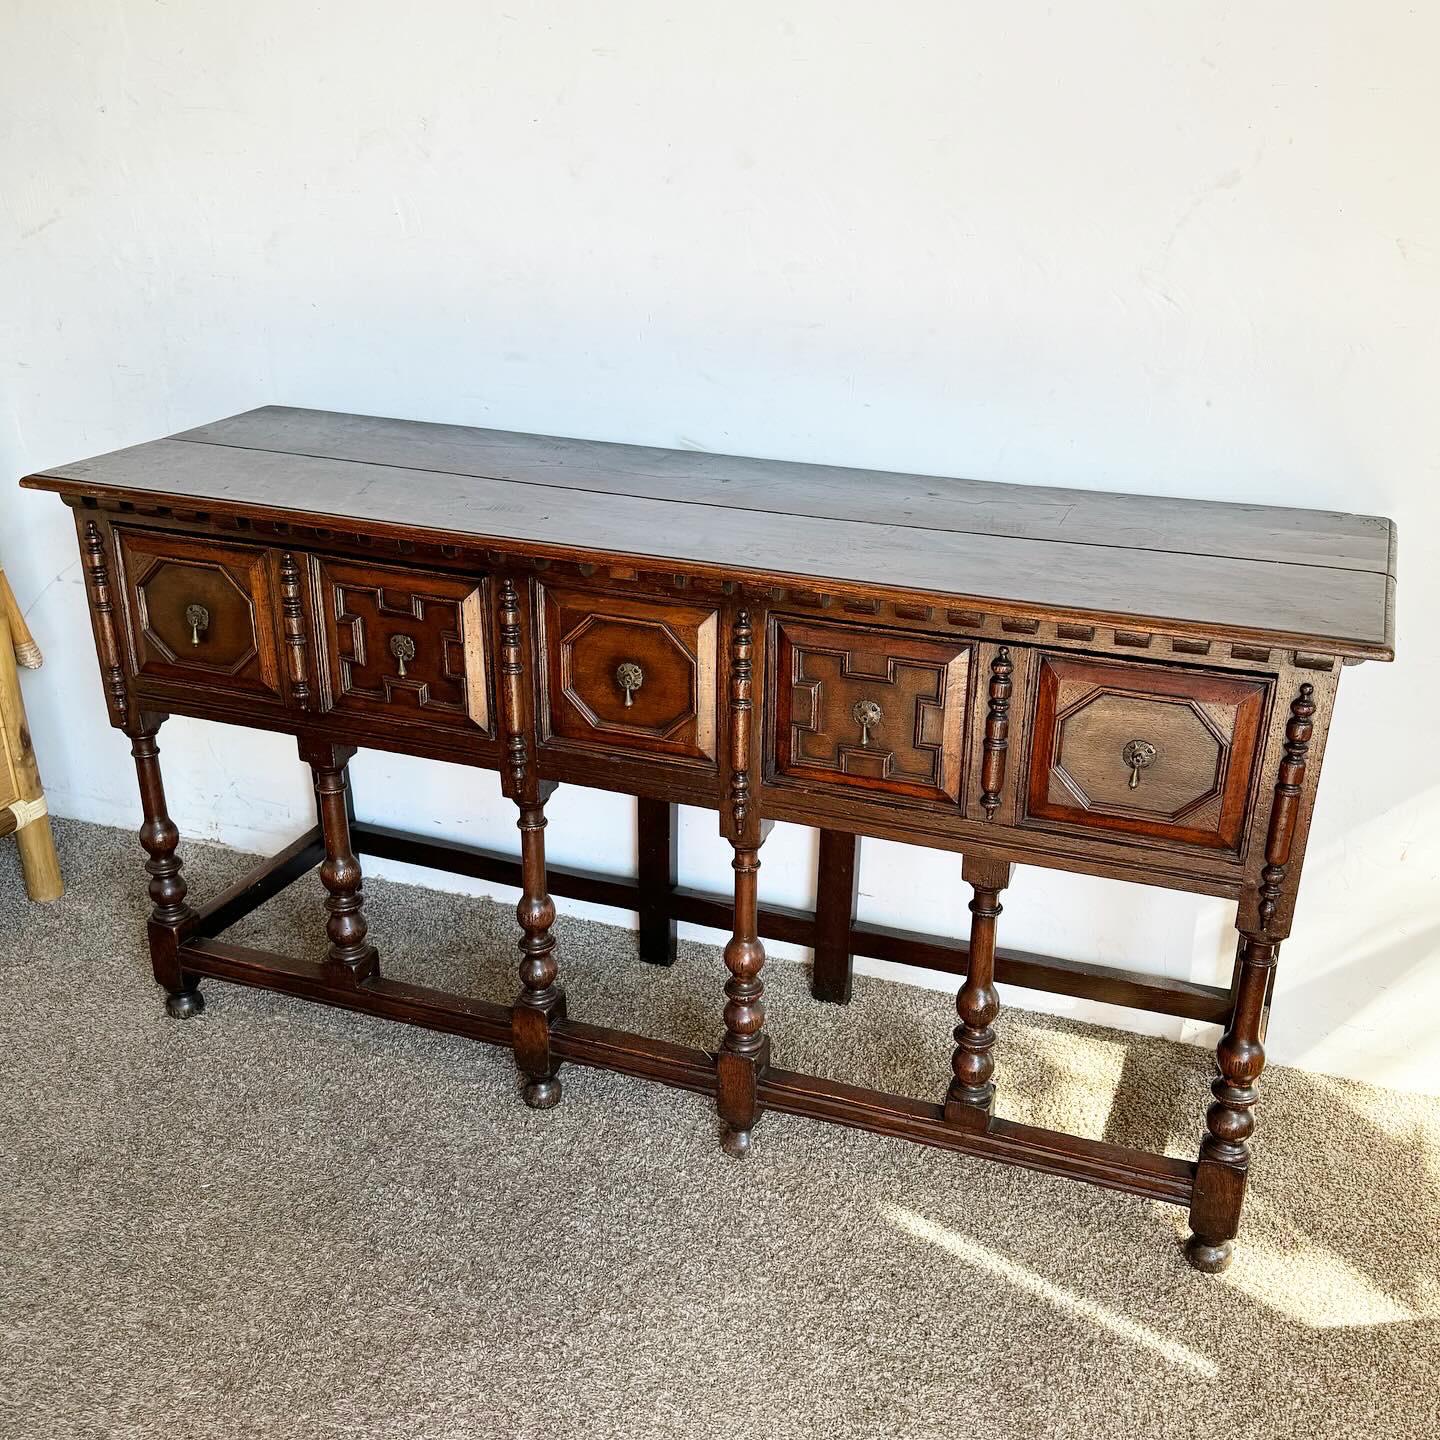 Antique English Jacobean Style Wooden Credenza/Sideboard In Good Condition For Sale In Delray Beach, FL